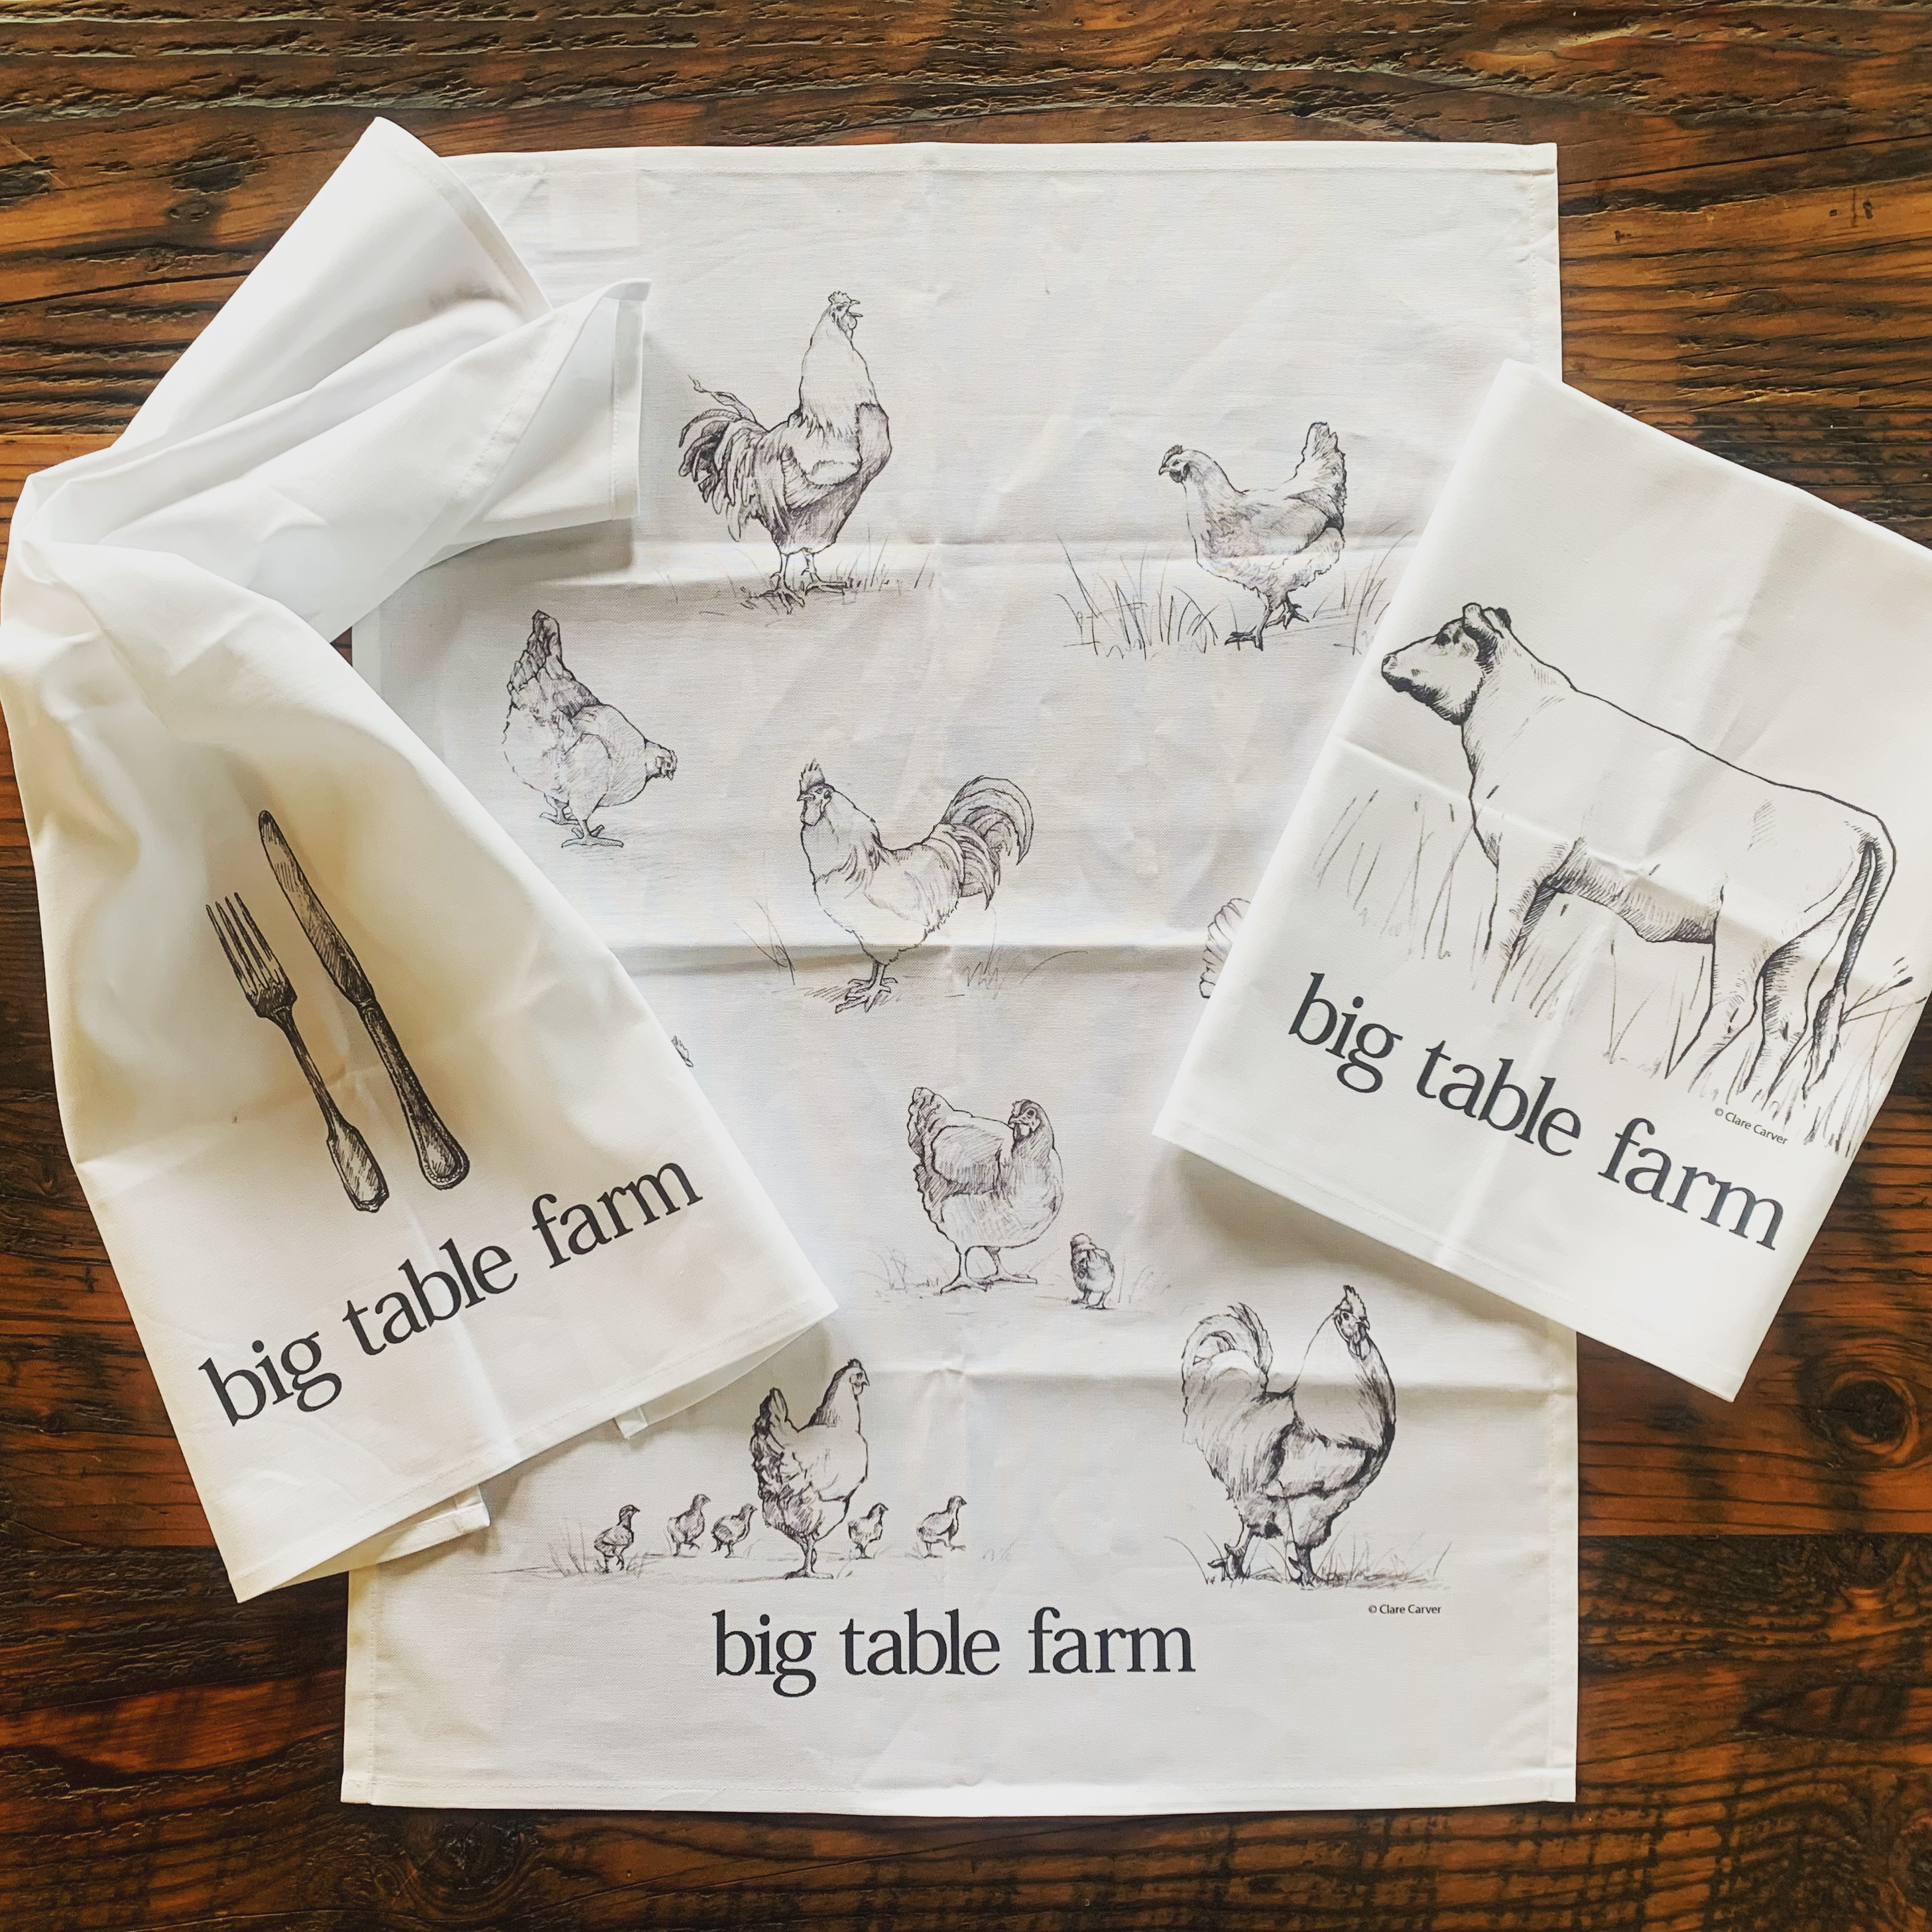 Product Image for Big Table Farm Tea Towels - only available with wine purchase